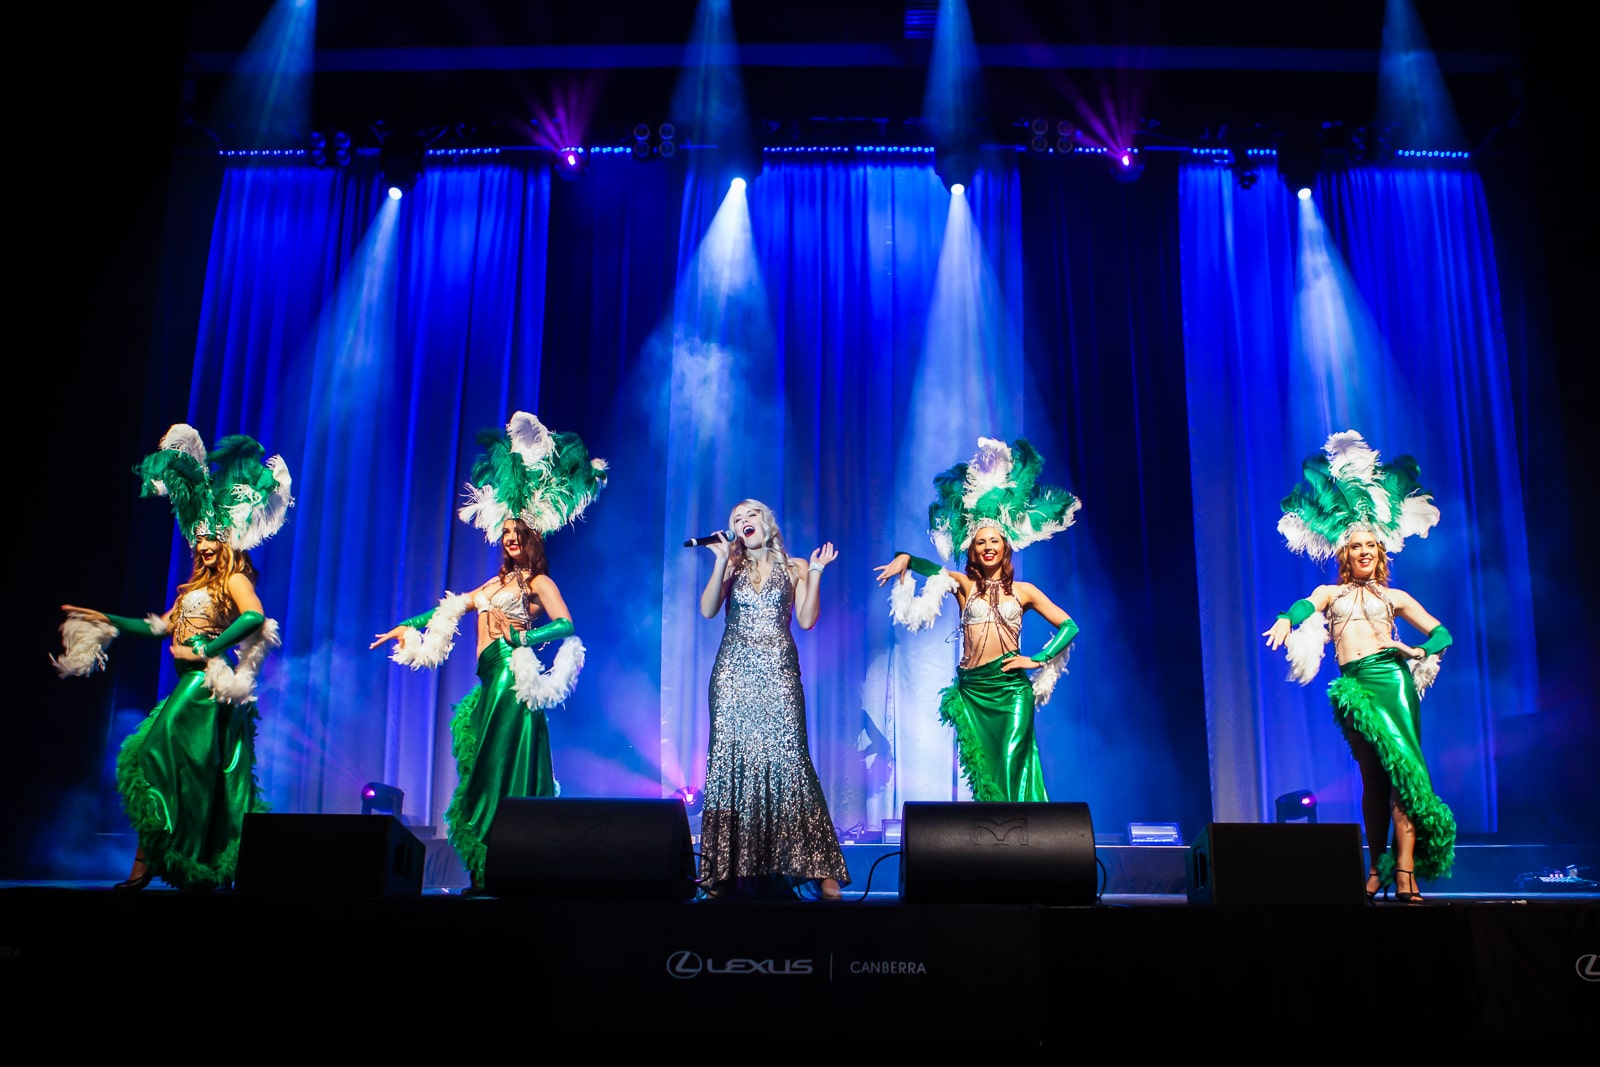 The Emeralds - the official cheer squad for the Canberra Raiders performing at the Ronald McDonald house gala ball